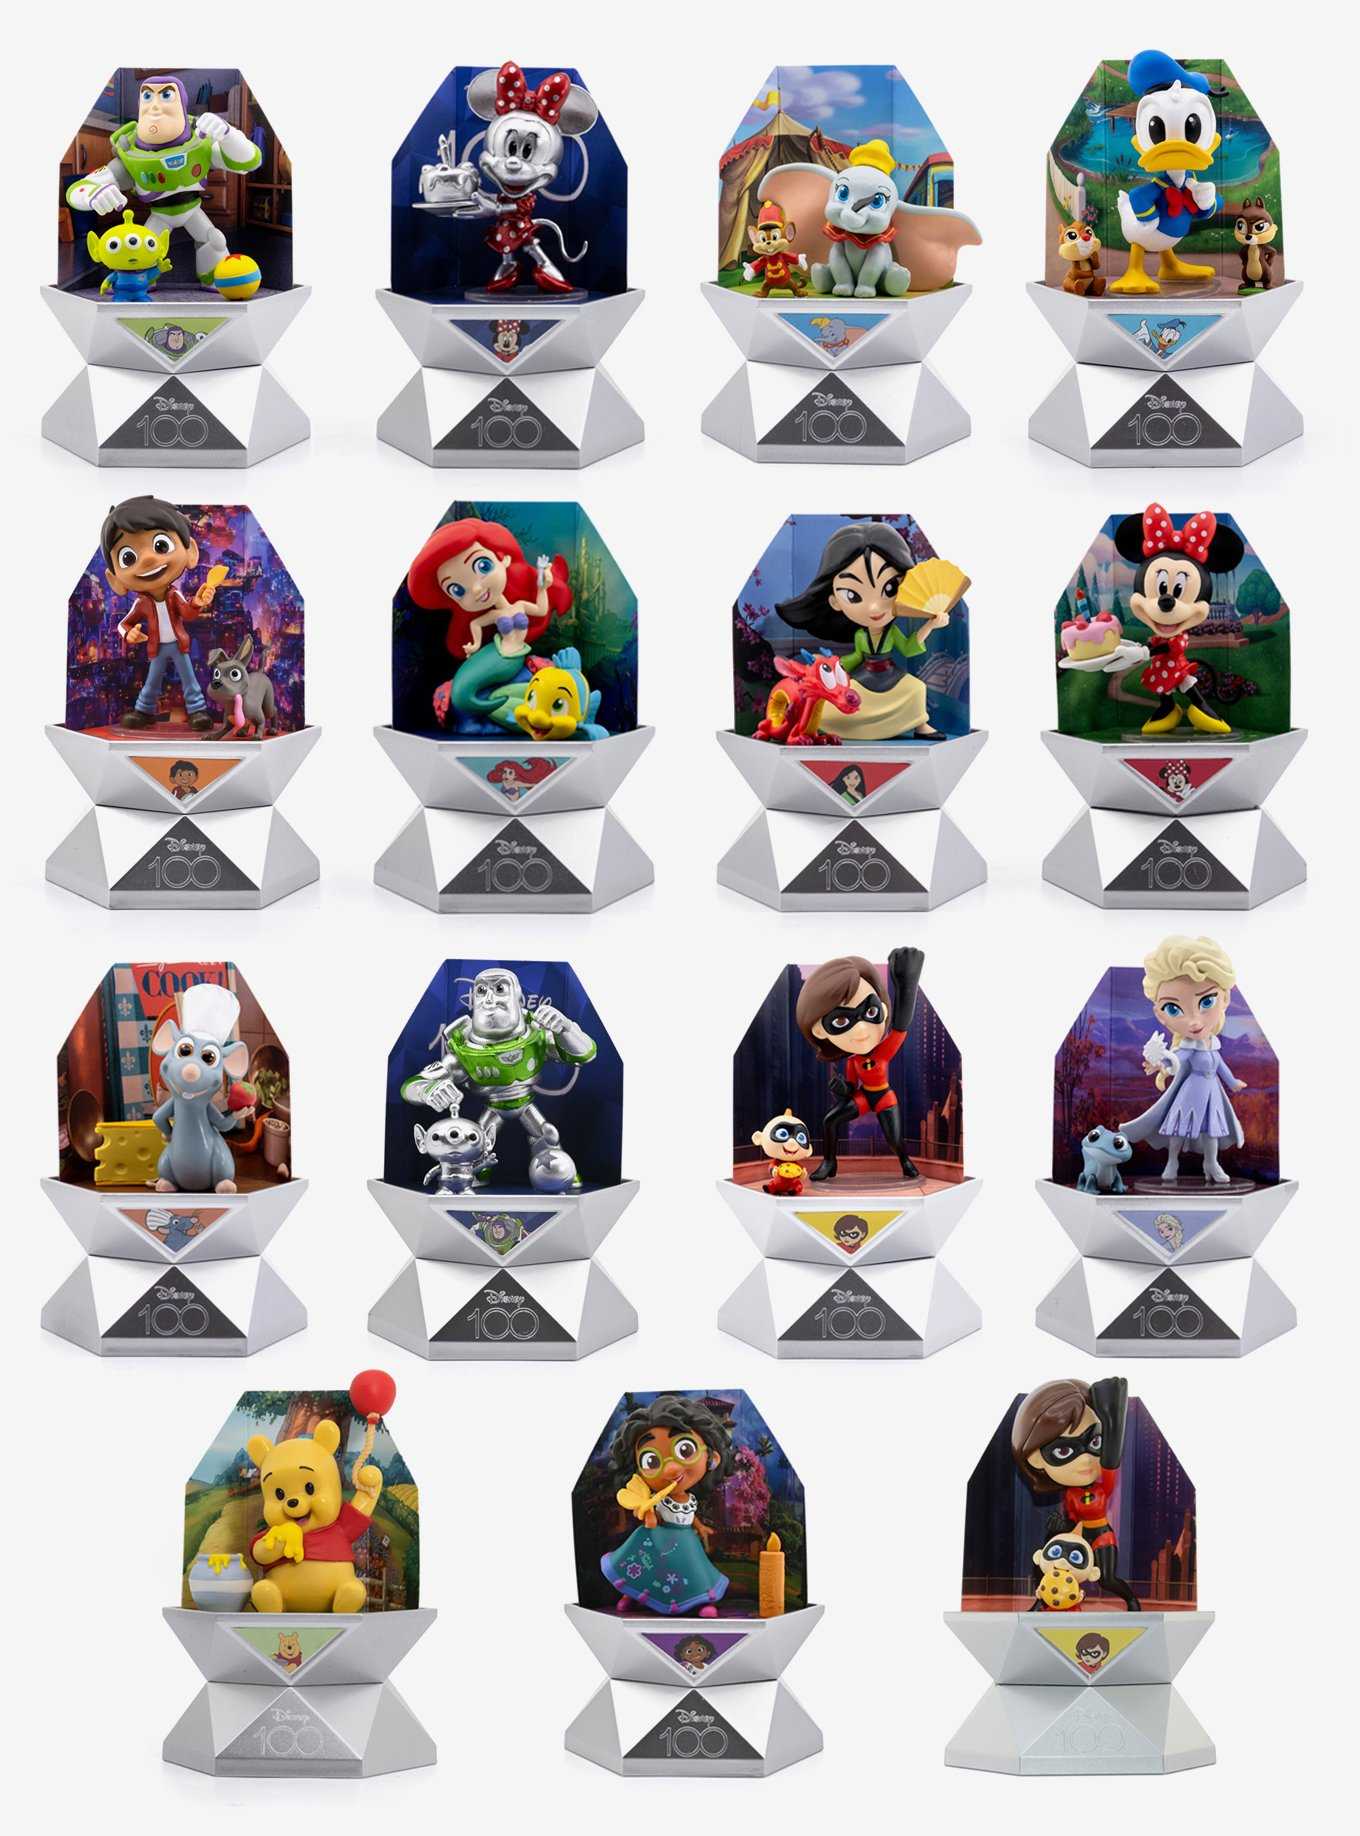 YuMe Disney 100 Series Mystery Capsule Blind Box with Surprise Characters  Figurines Toys 12 Pack